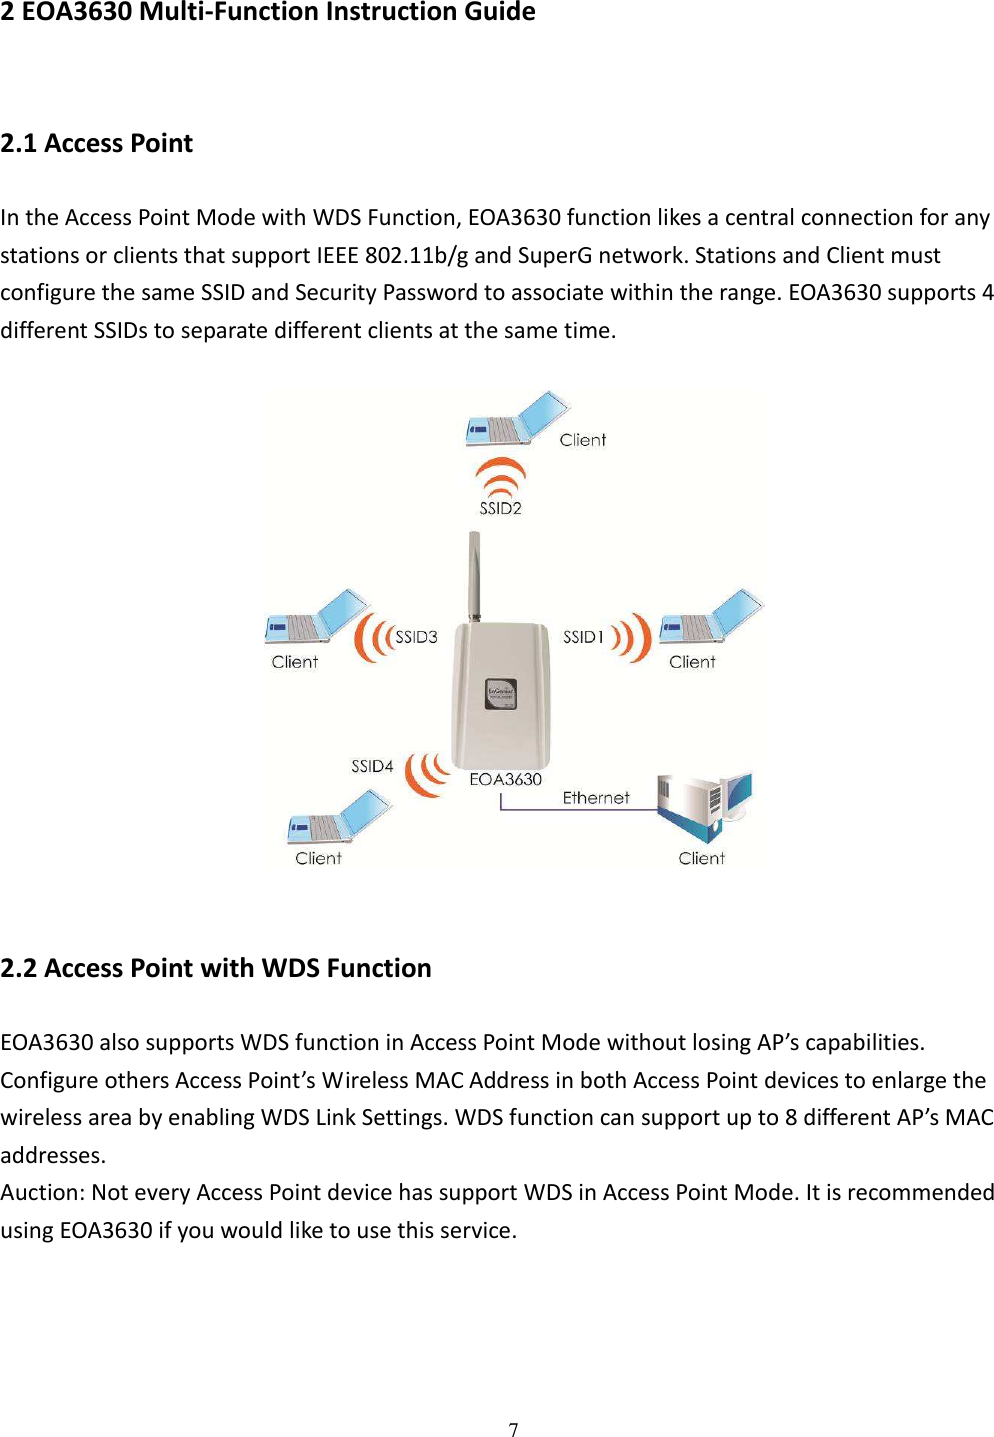   7  2 EOA3630 Multi-Function Instruction Guide 2.1 Access Point In the Access Point Mode with WDS Function, EOA3630 function likes a central connection for any stations or clients that support IEEE 802.11b/g and SuperG network. Stations and Client must configure the same SSID and Security Password to associate within the range. EOA3630 supports 4 different SSIDs to separate different clients at the same time.    2.2 Access Point with WDS Function EOA3630 also supports WDS function in Access Point Mode without losing AP’s capabilities. Configure others Access Point’s Wireless MAC Address in both Access Point devices to enlarge the wireless area by enabling WDS Link Settings. WDS function can support up to 8 different AP’s MAC addresses. Auction: Not every Access Point device has support WDS in Access Point Mode. It is recommended using EOA3630 if you would like to use this service.  